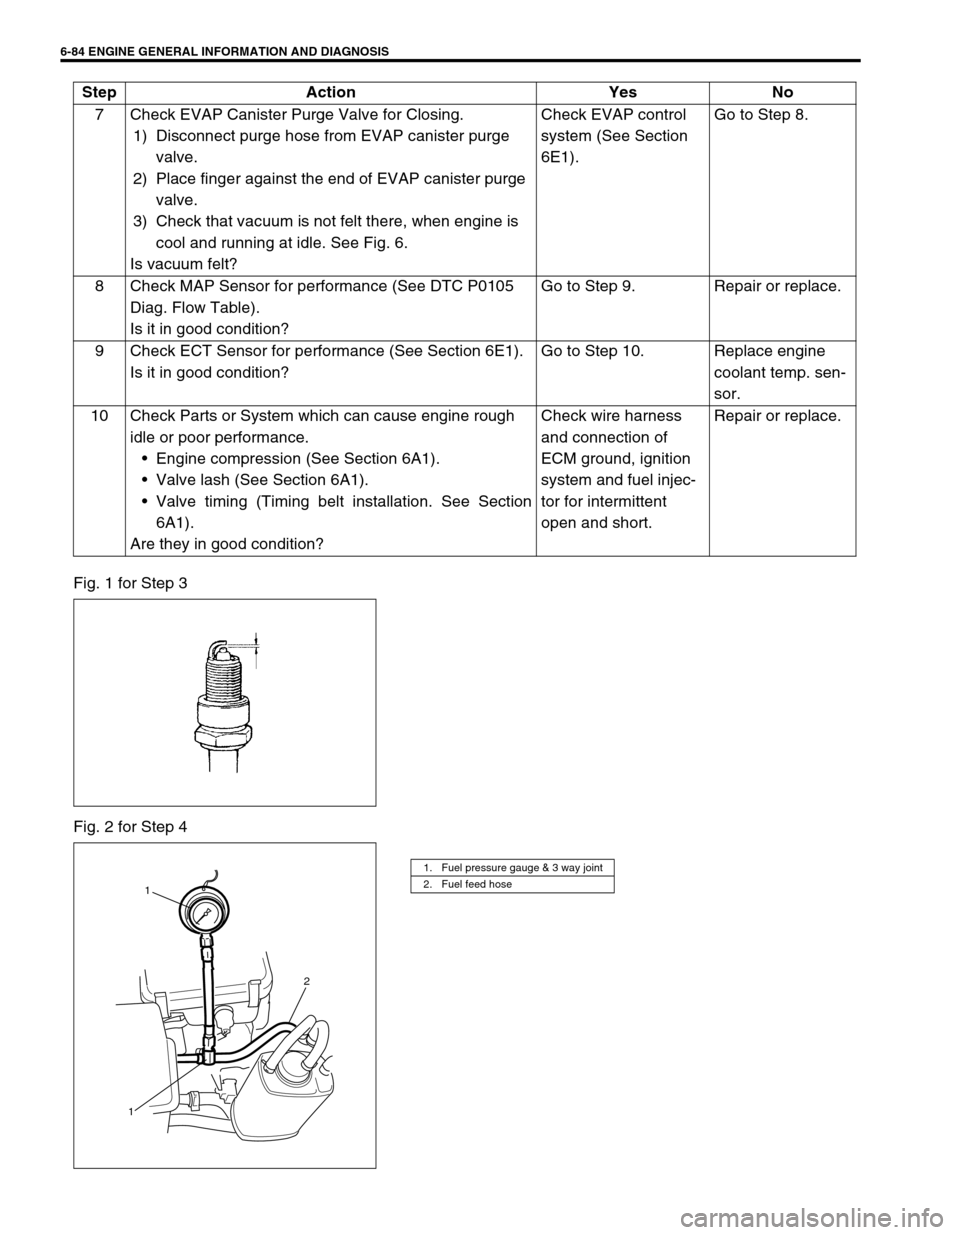 SUZUKI SWIFT 2000 1.G RG413 Service Workshop Manual 6-84 ENGINE GENERAL INFORMATION AND DIAGNOSIS
Fig. 1 for Step 3
Fig. 2 for Step 47 Check EVAP Canister Purge Valve for Closing.
1) Disconnect purge hose from EVAP canister purge 
valve.
2) Place finge